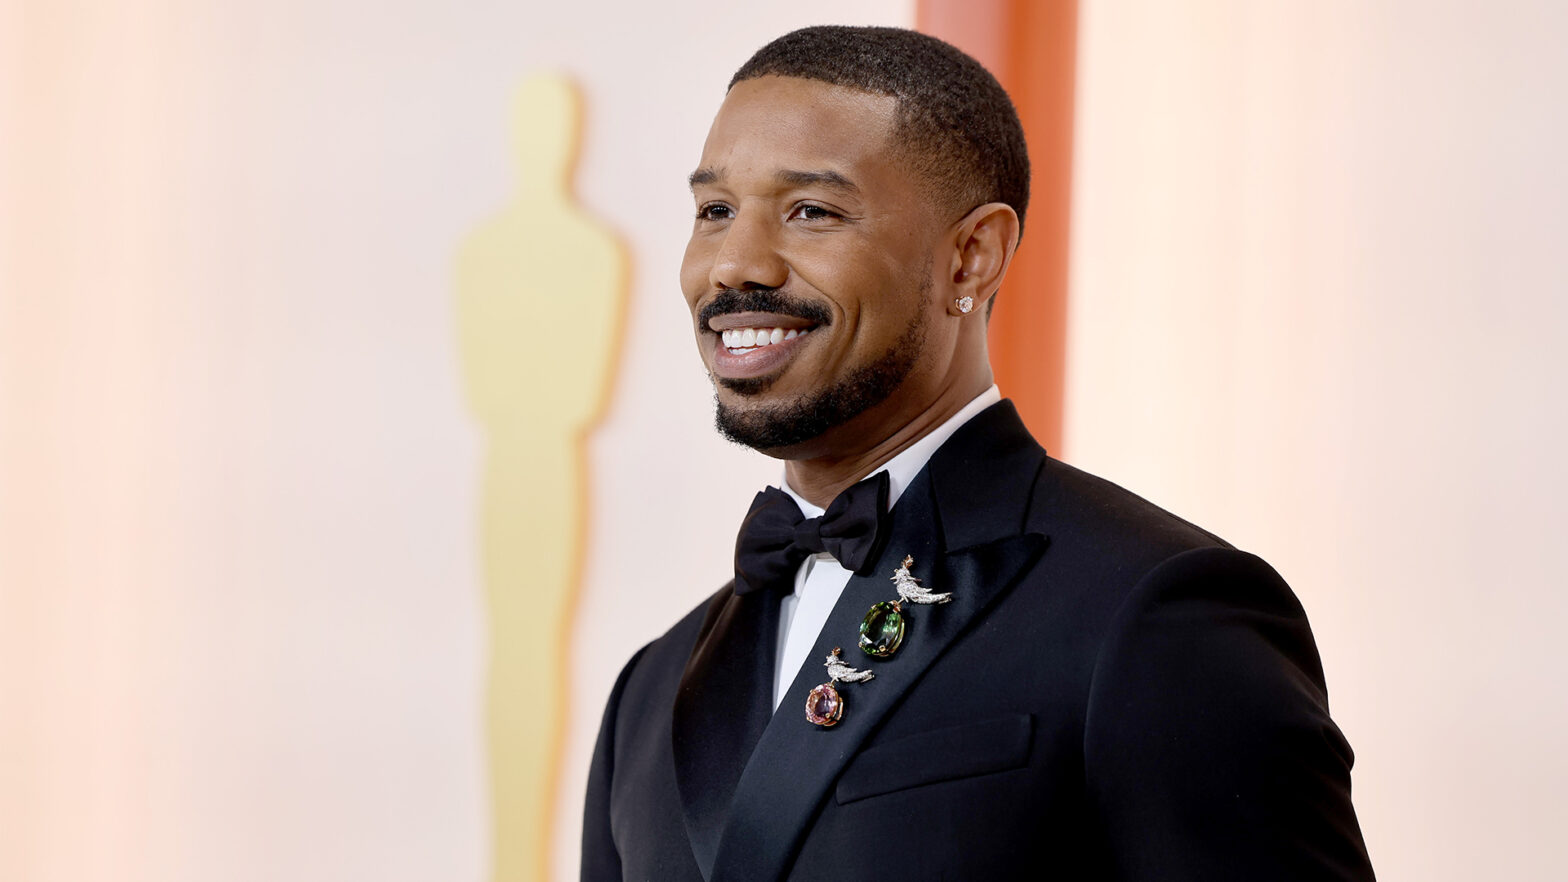 Michael B. Jordan Buys Stake In Alpine Racing Alongside Other Celebrities, Deal Reportedly Brings The F1 Team's Valuation To $900M